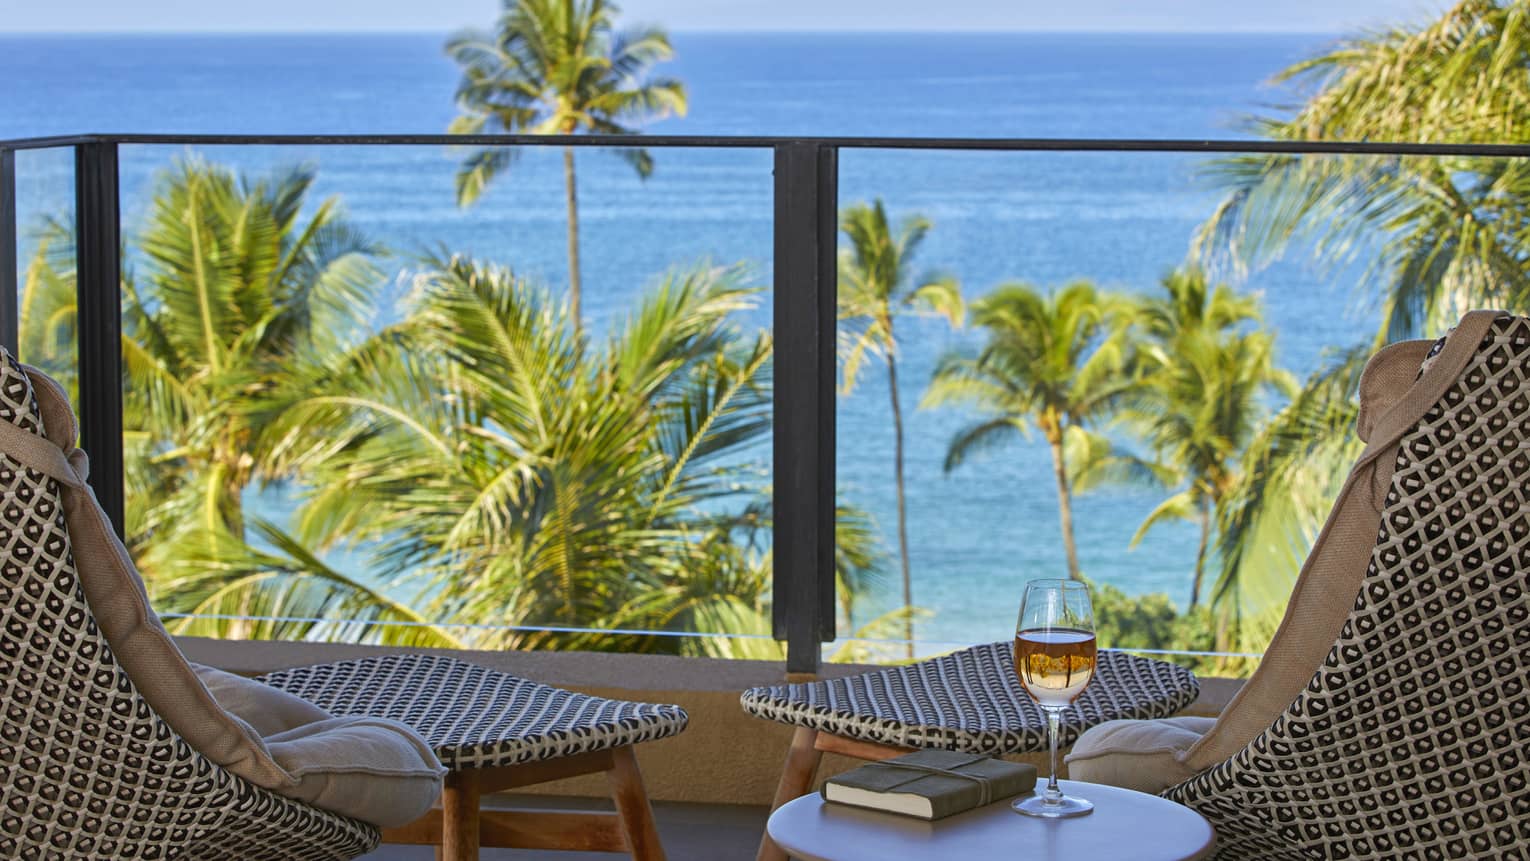 Balcony with rattan chairs, round table with book and glass of wine, overlooking palm trees and blue ocean